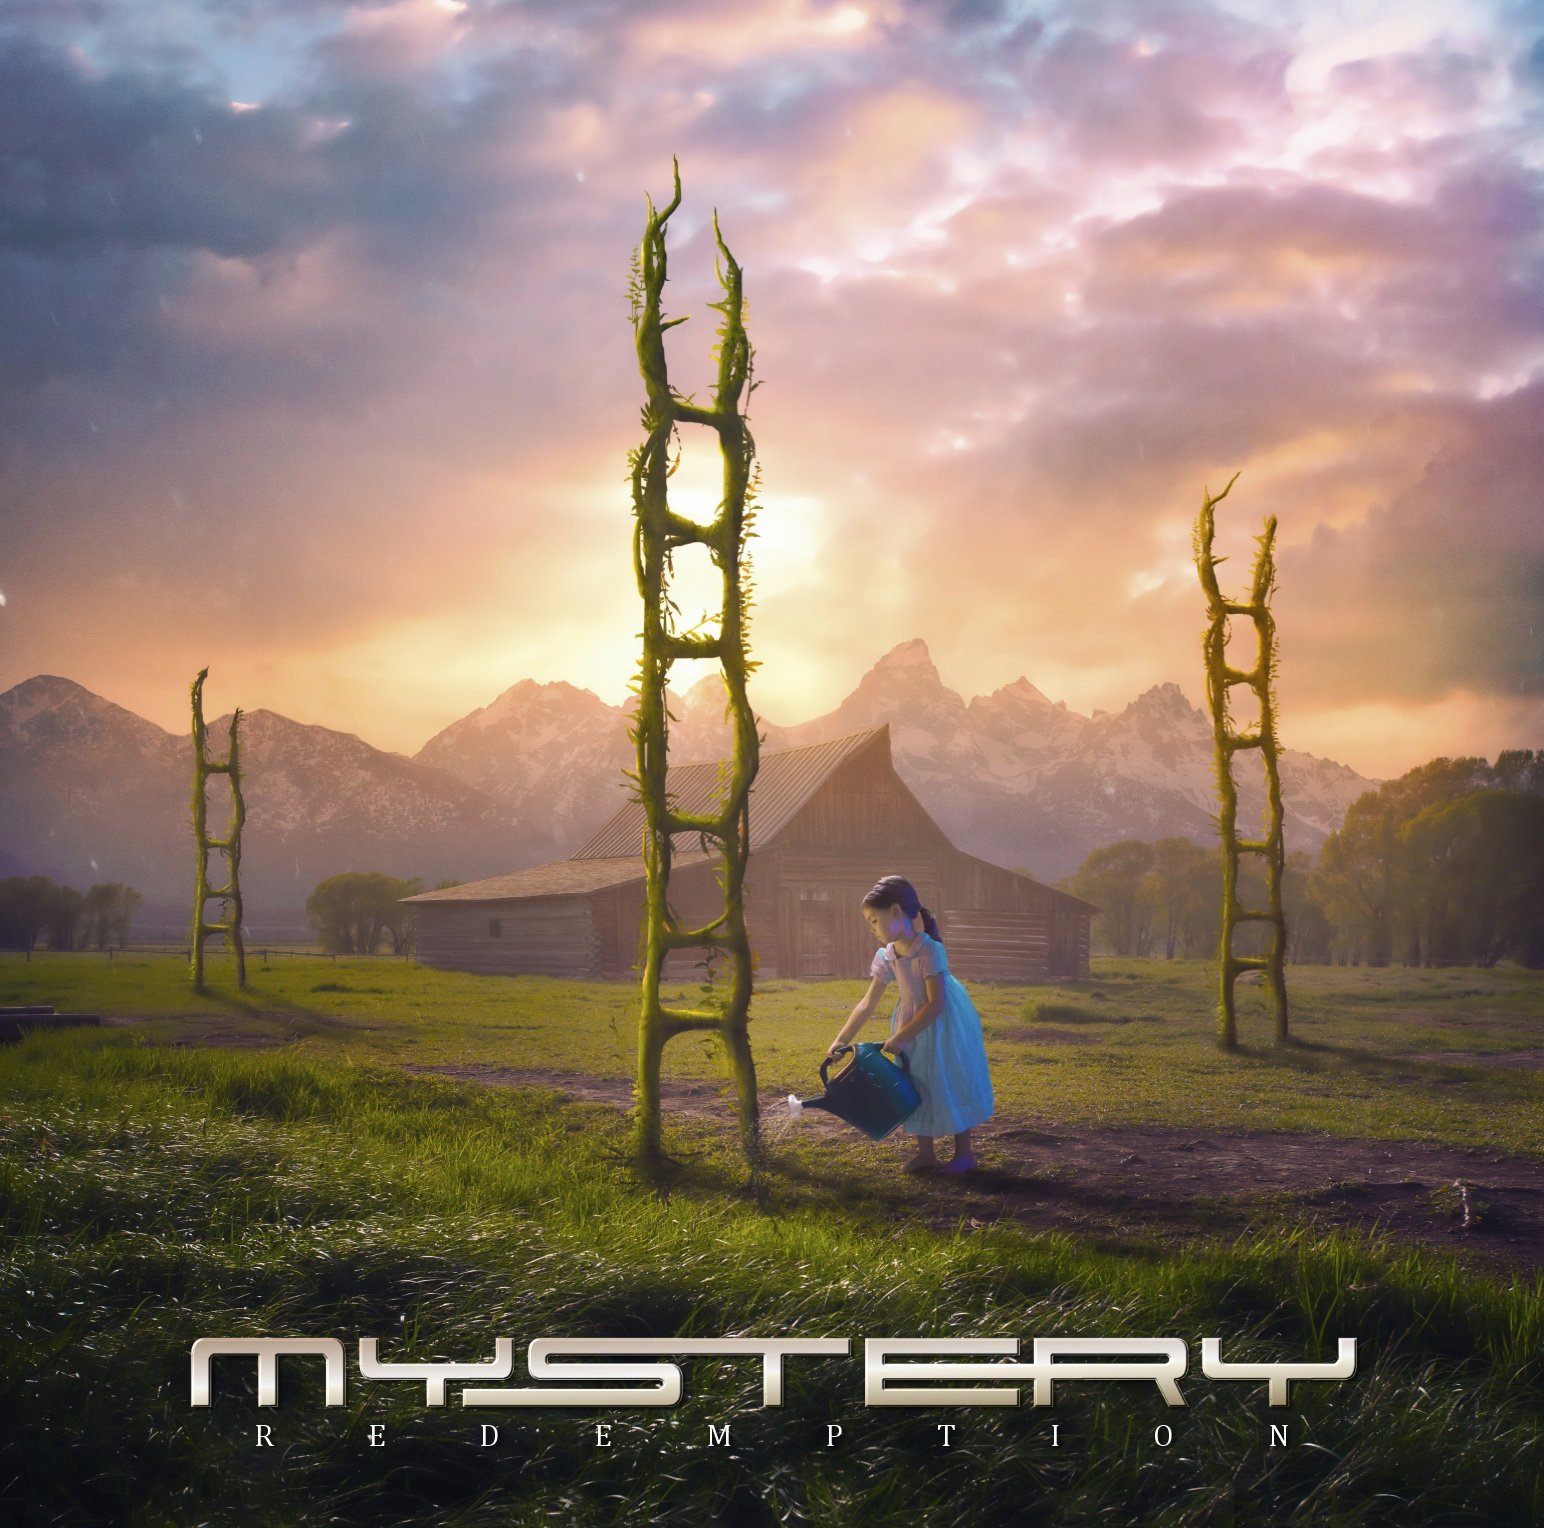 CD Shop - MYSTERY REDEMPTION